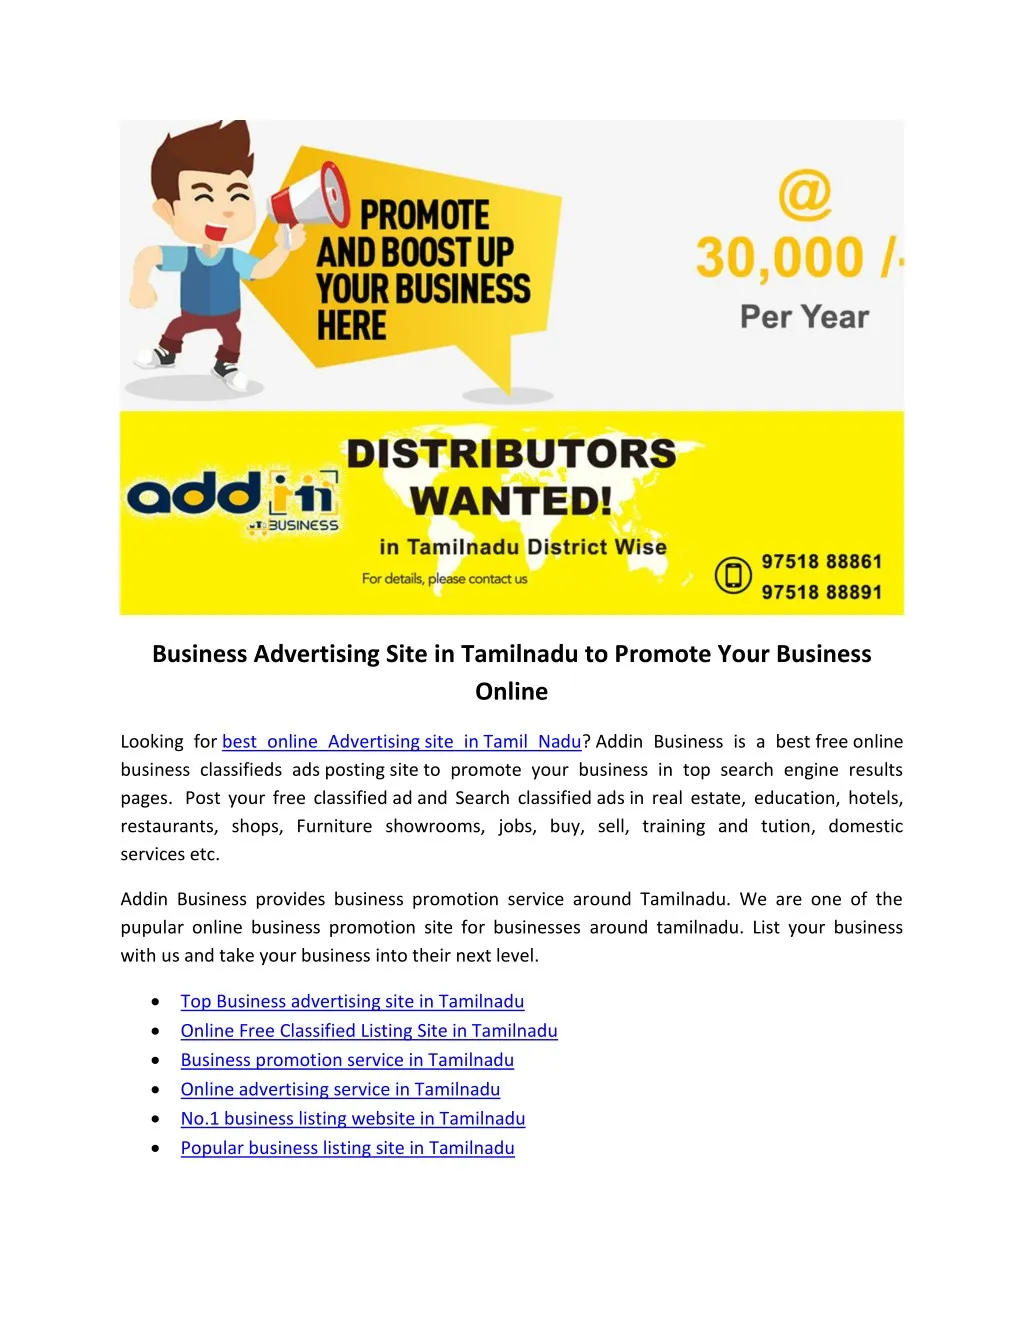 business advertising site in tamilnadu to promote